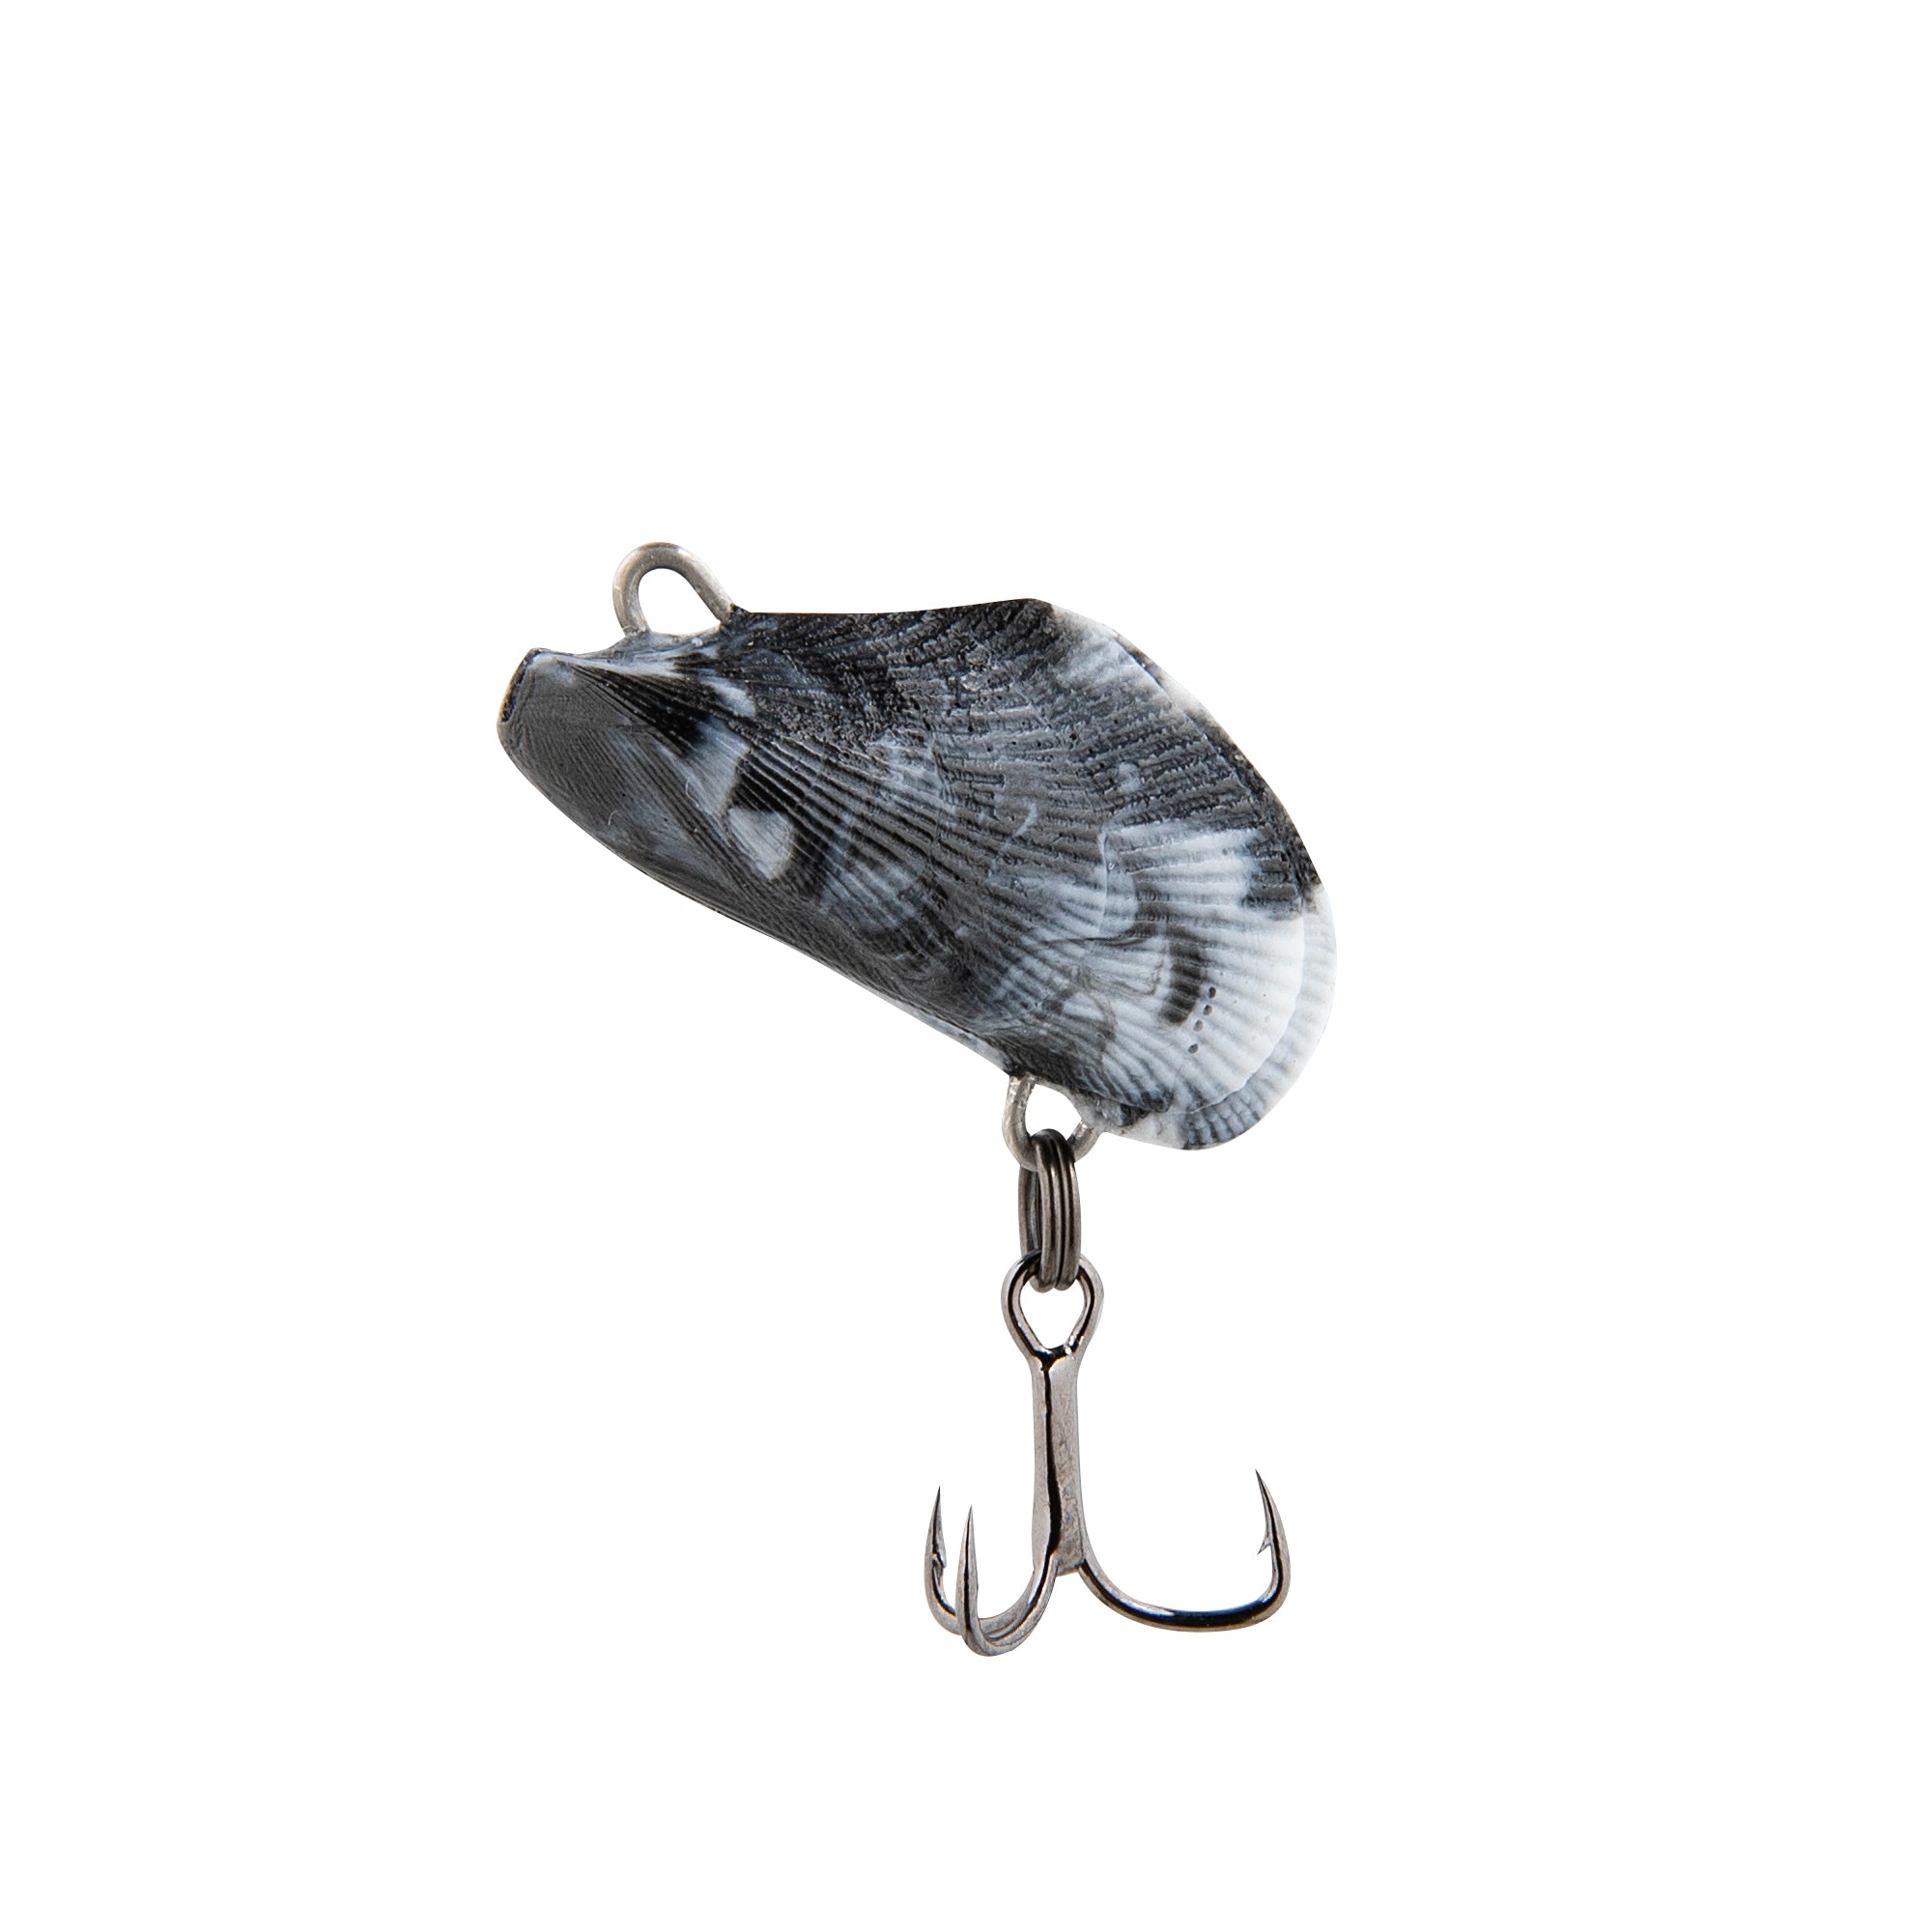 Blue Lip Baits Pygmy Mussel Light 1.3g - Compleat Angler Nedlands Pro Tackle